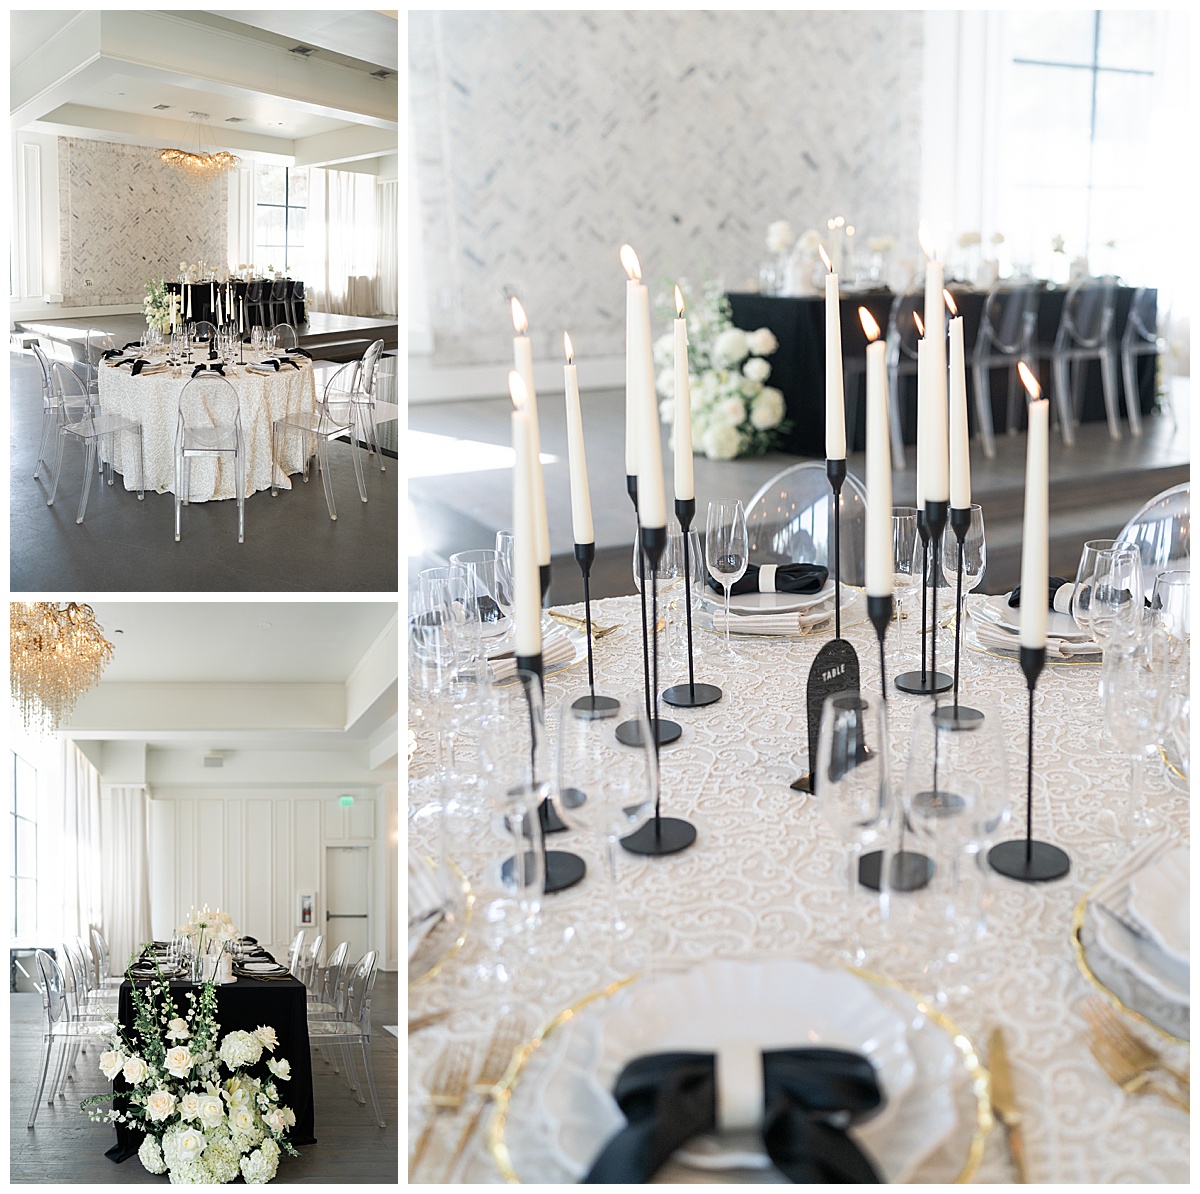 Black and white wedding reception decor by Peach Orchard Wedding Photographer